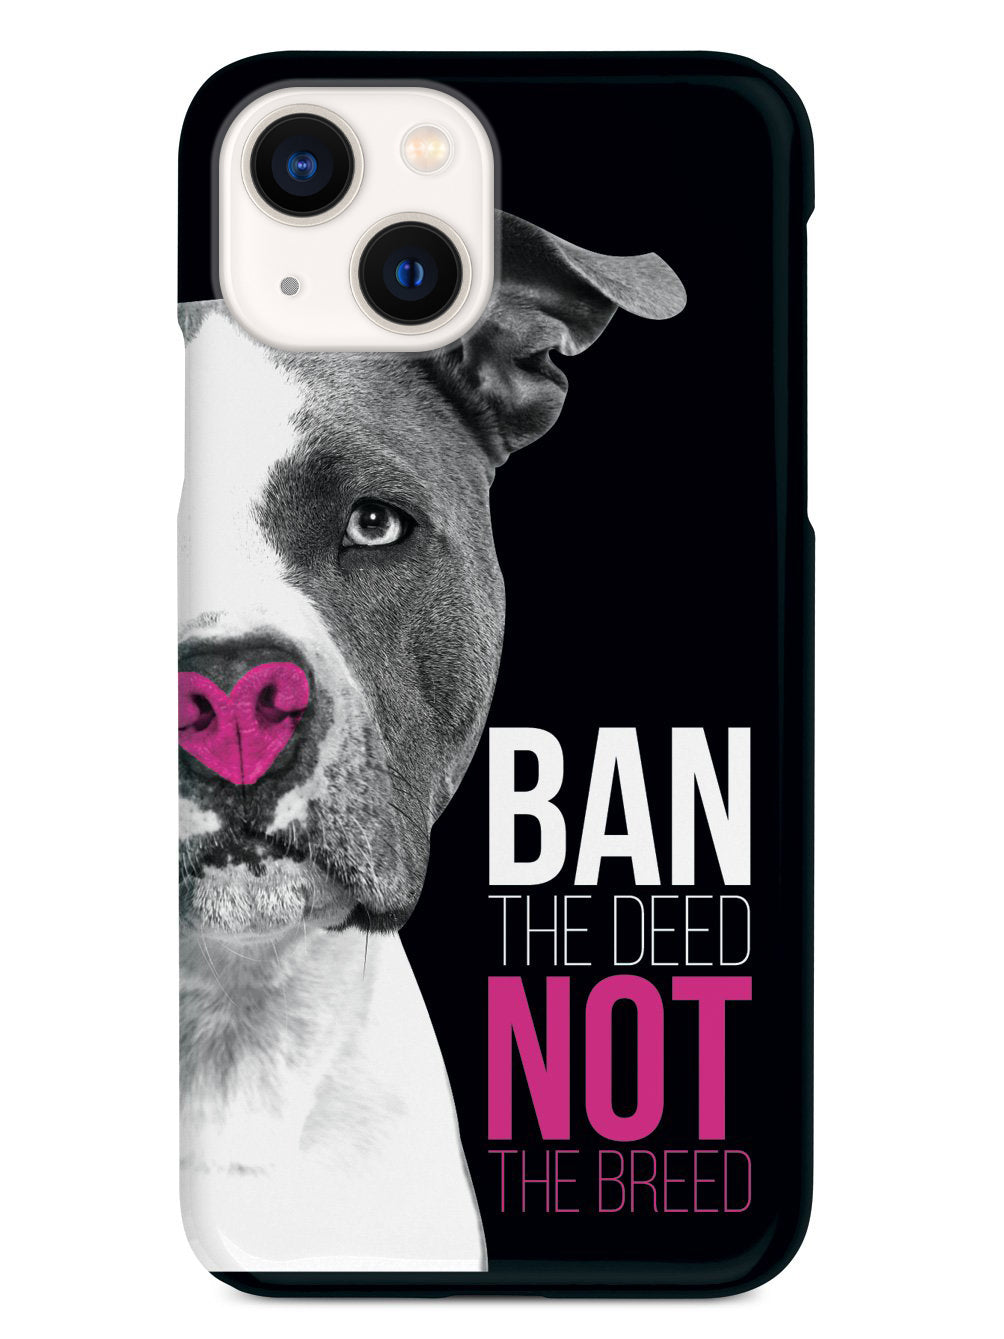 Ban The Deed, Not The Breed - Pitbull Case